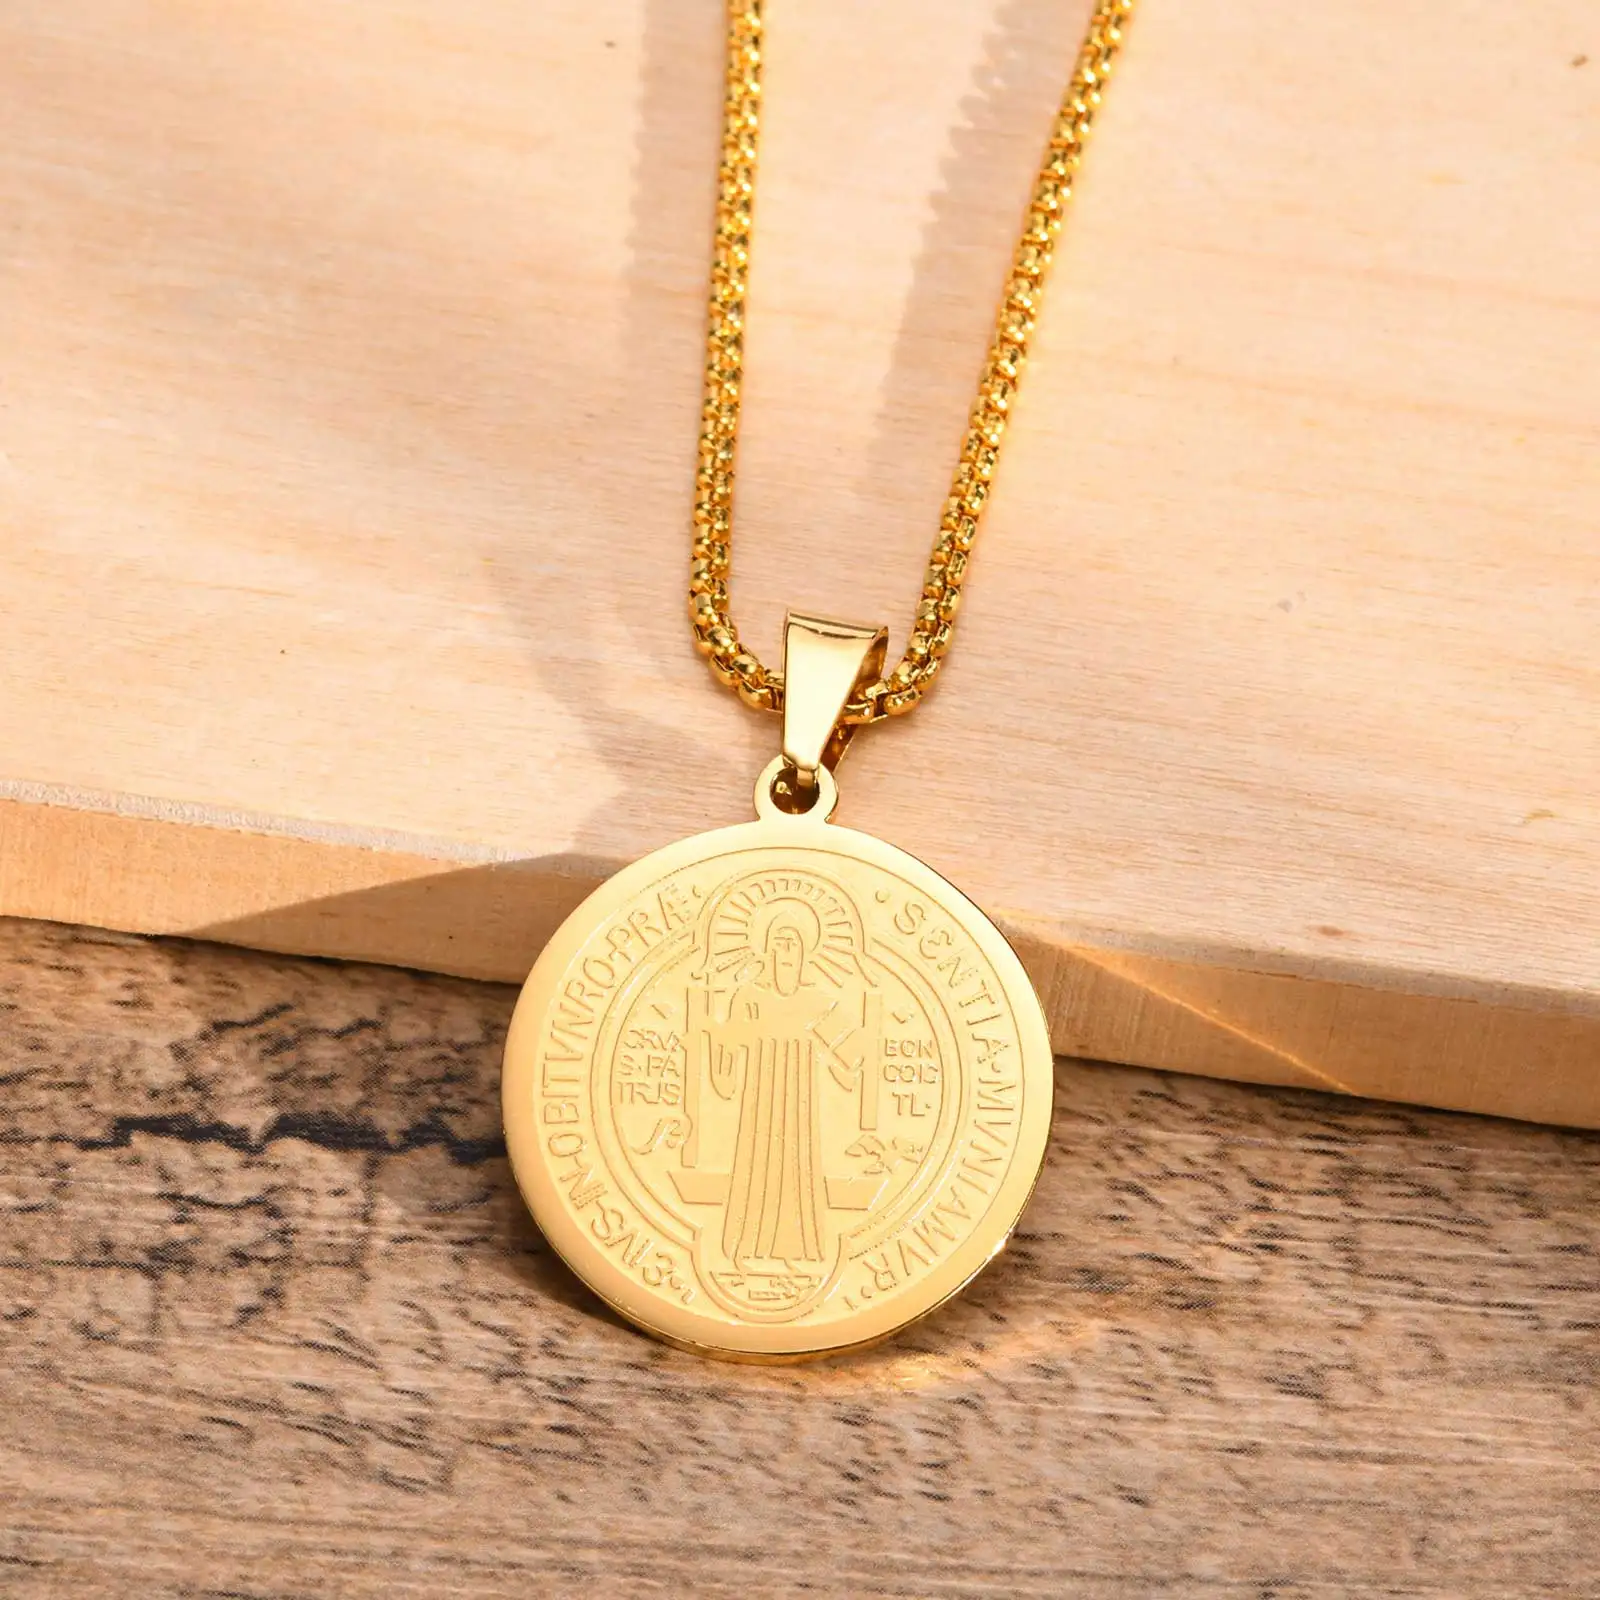 14K Solid Fine Gold Filled Mother Virgin Mary Gold Coin Necklace And  Earrings Set Catholic Religious Country Gift For Women From  Xinpengbusiness, $5.63 | DHgate.Com